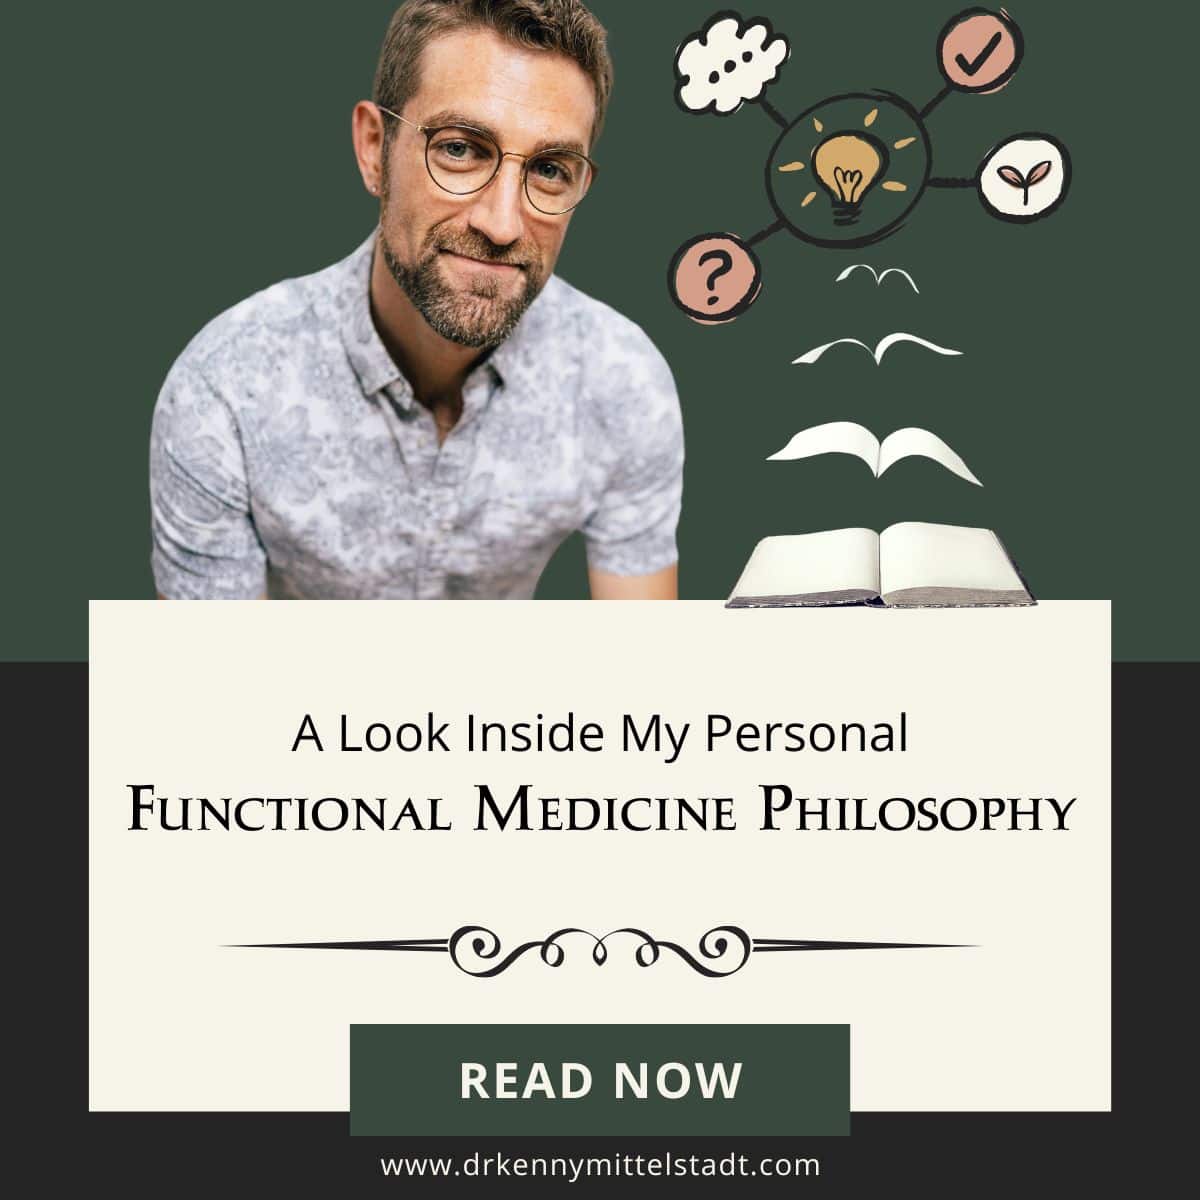 This is the blog post featured images that contains a picture of Dr. Kenny Mittelstadt with abstract graphics around that depict thinking and idea formation with the title "A Look Inside My Personal Functional Medicine Philosophy"